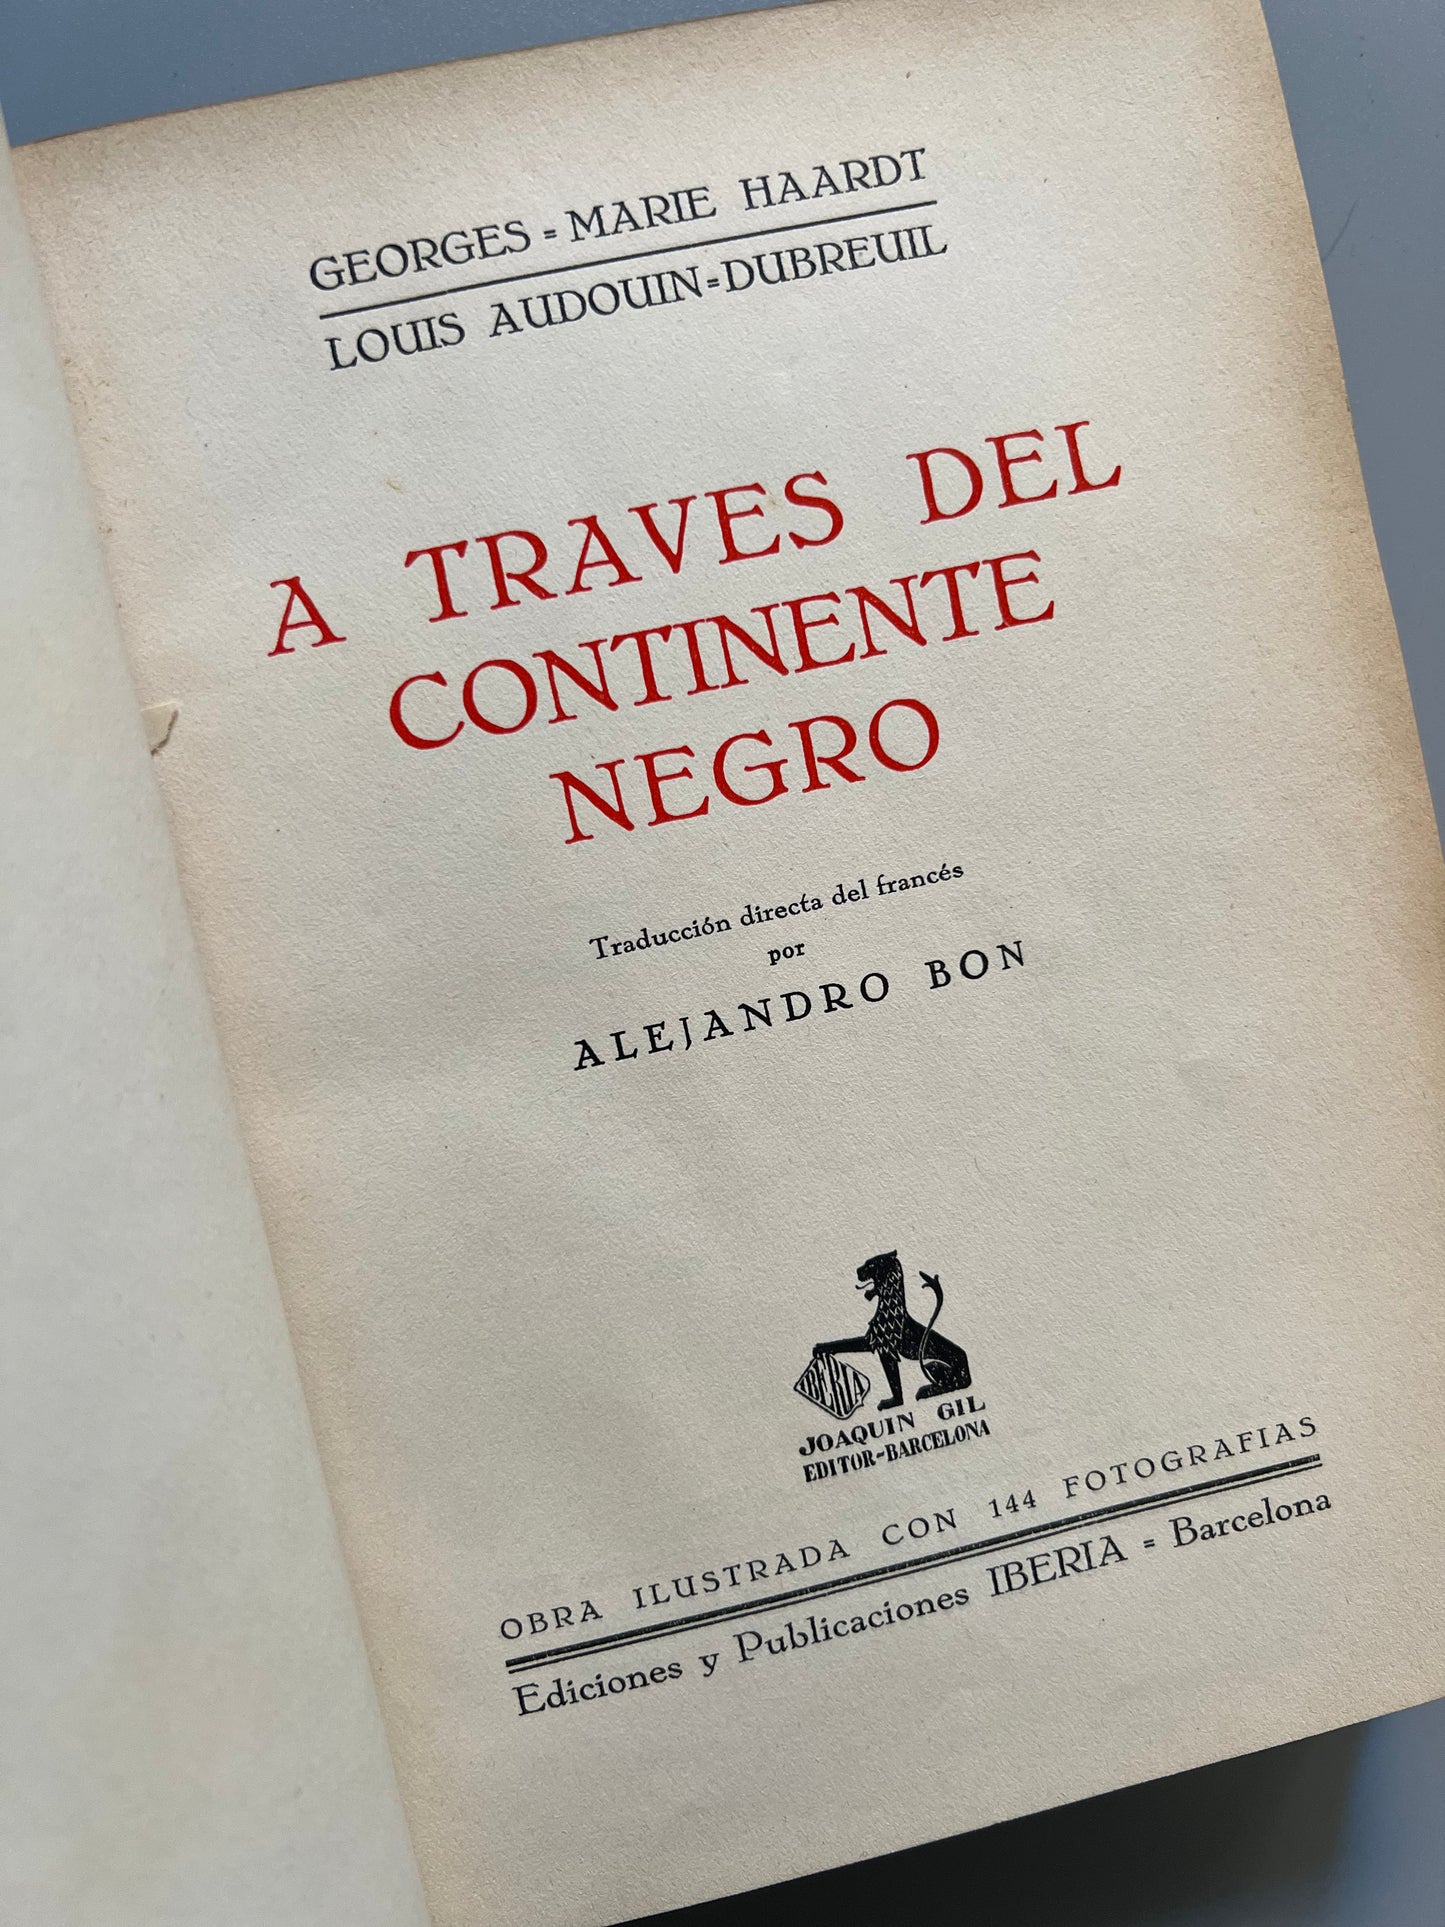 A través del continente negro, Georges-Marie Haardt y Louis Audouin Dubreuil - Gustavo Gili editor, 1929